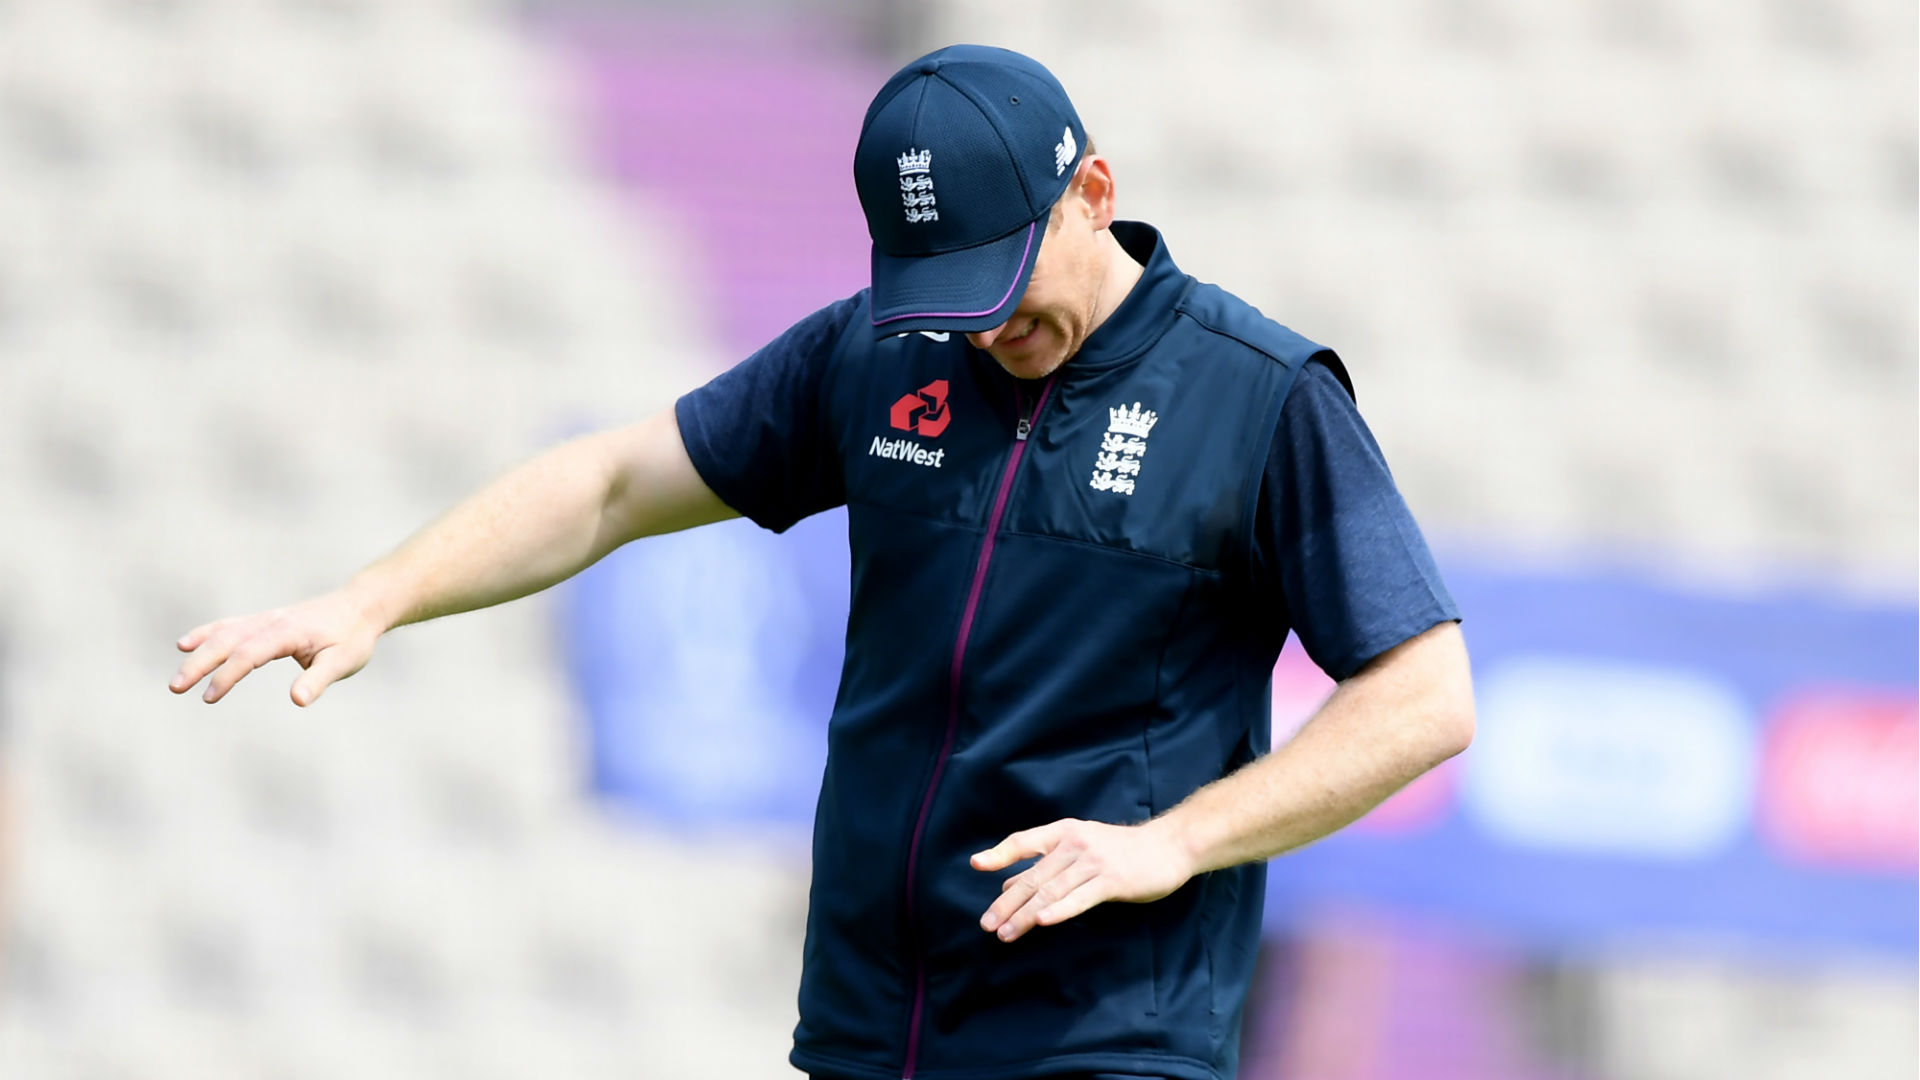 With the Cricket World Cup looming on the horizon, England captain Eoin Morgan suffered a finger injury in training on Friday.